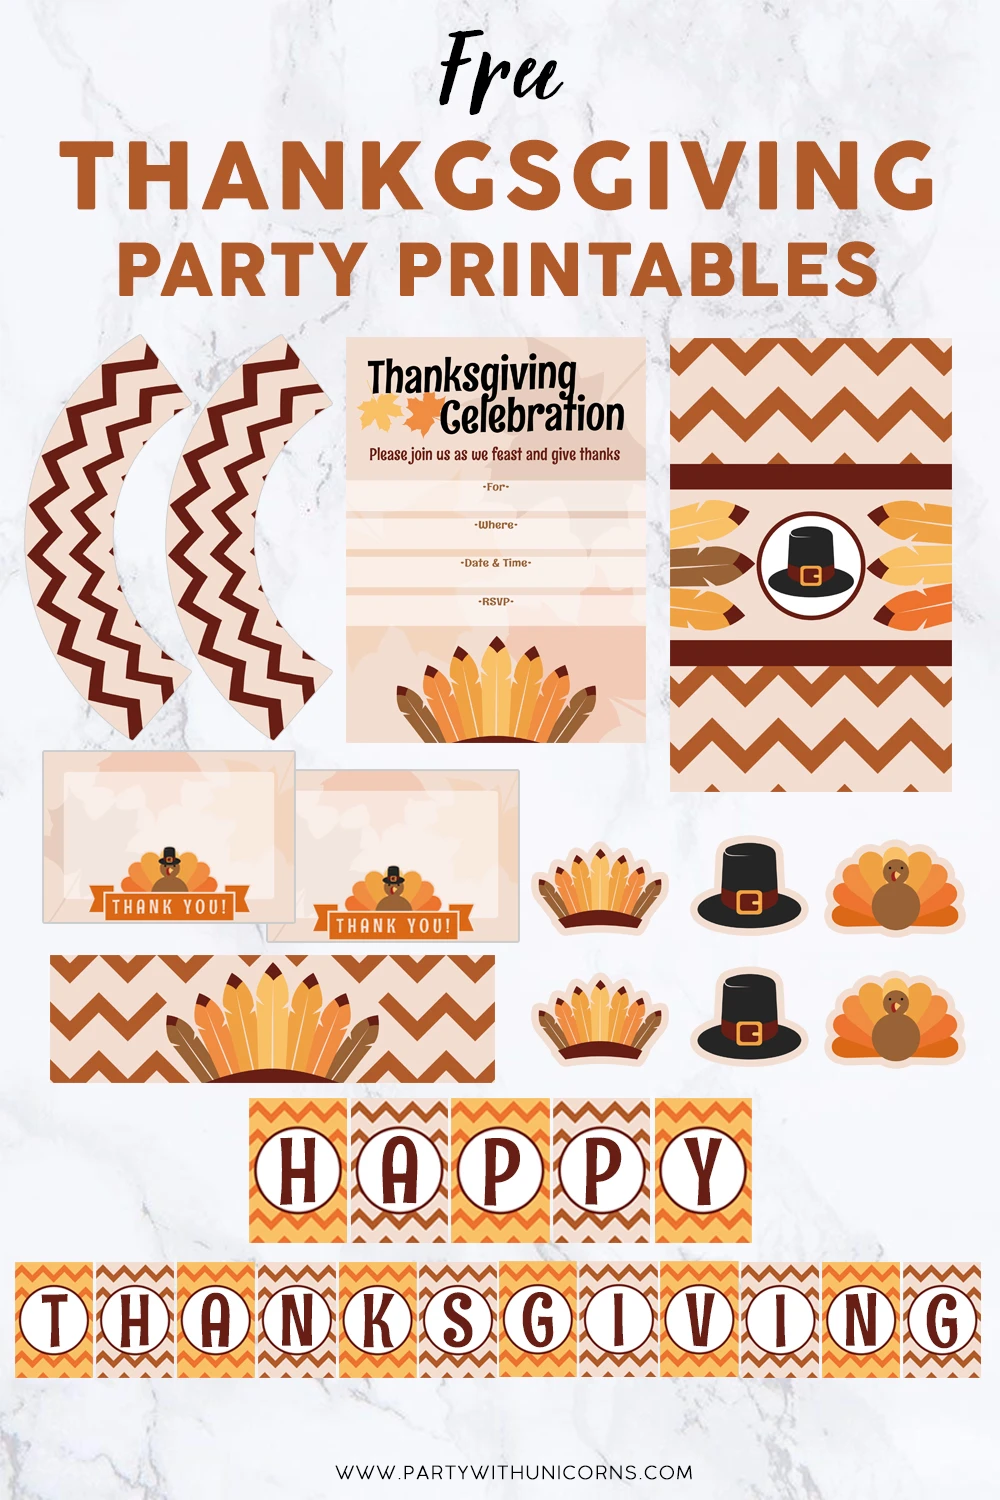 Thanksgiving party set includes